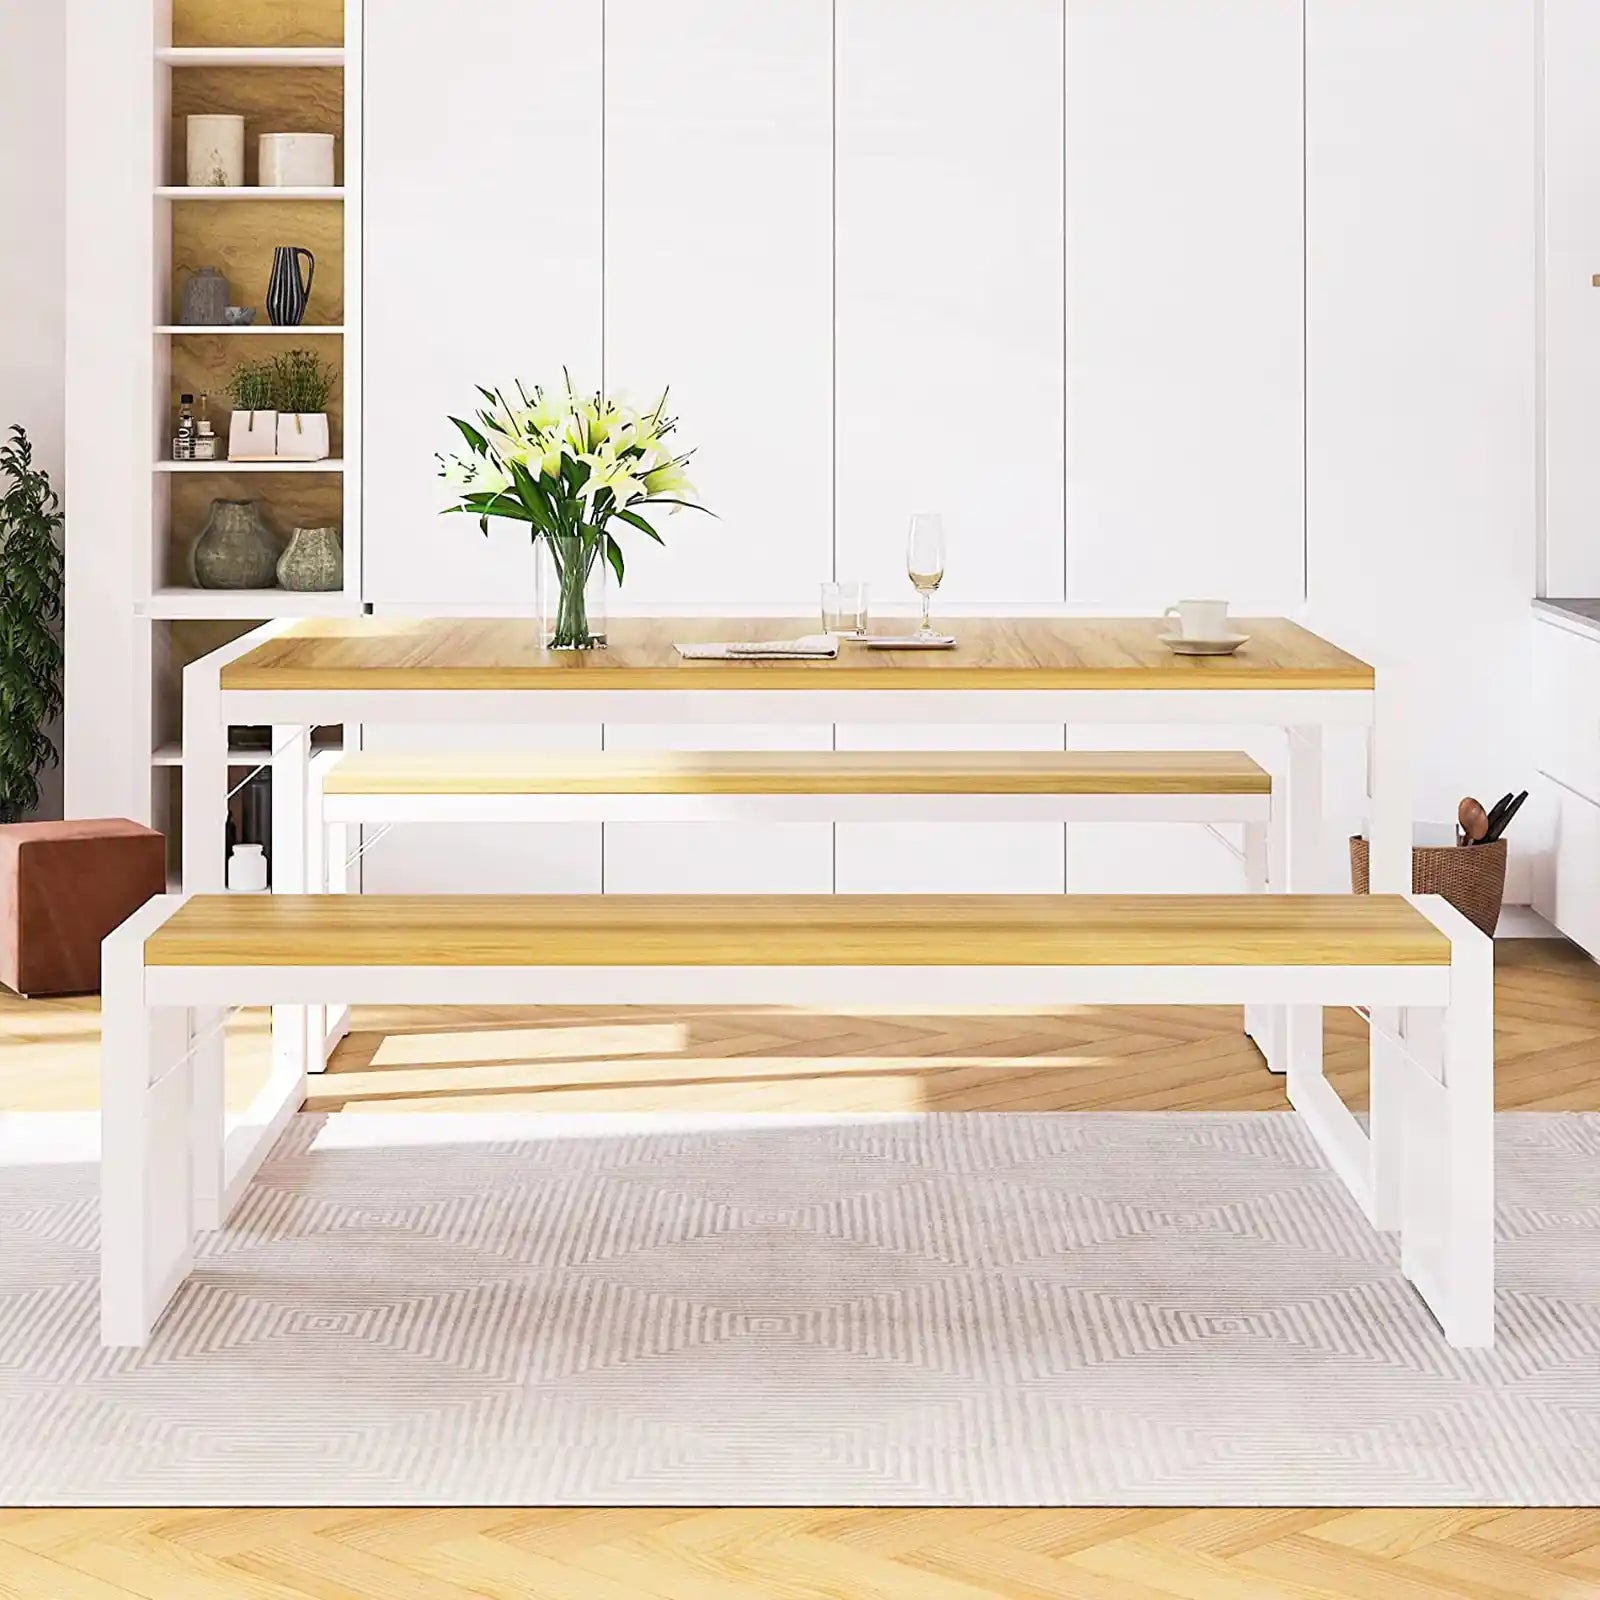 Industrial Table with 2 Benches , Sturdy Structure / Space-Saving